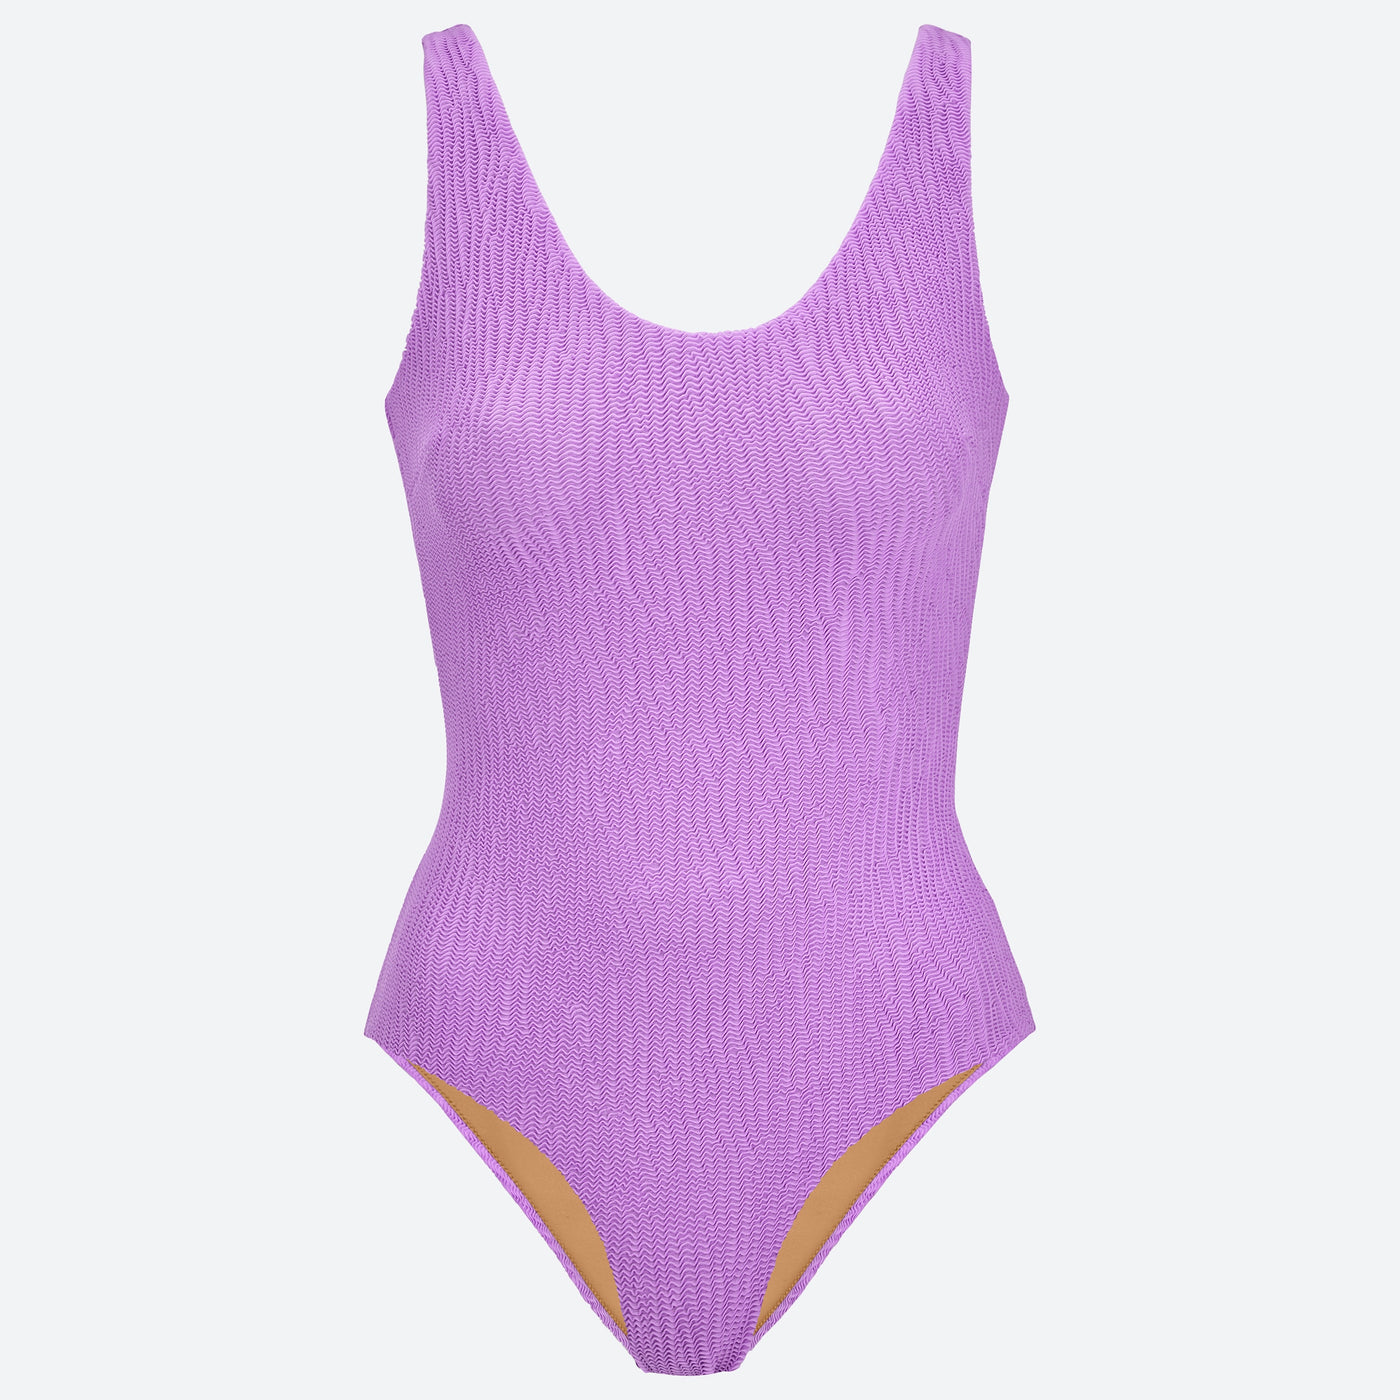 Bathing suit Revival isola adults / XS